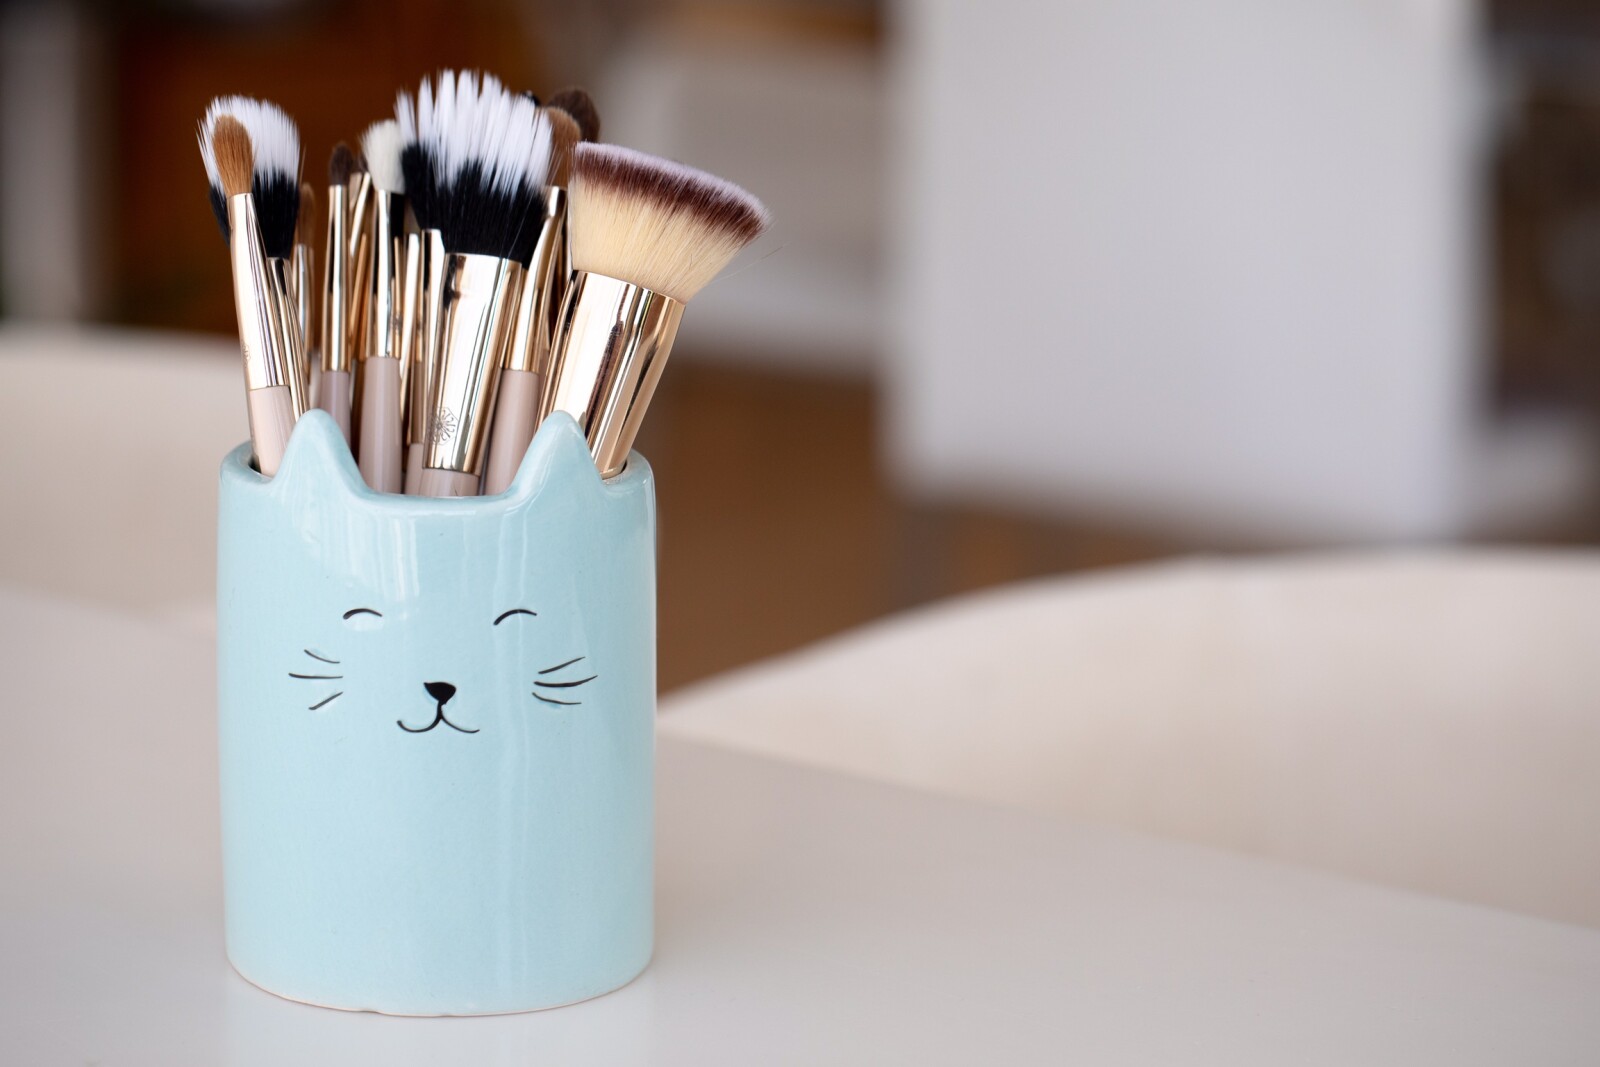 How Often Do You Clean Your Makeup Brushes? 